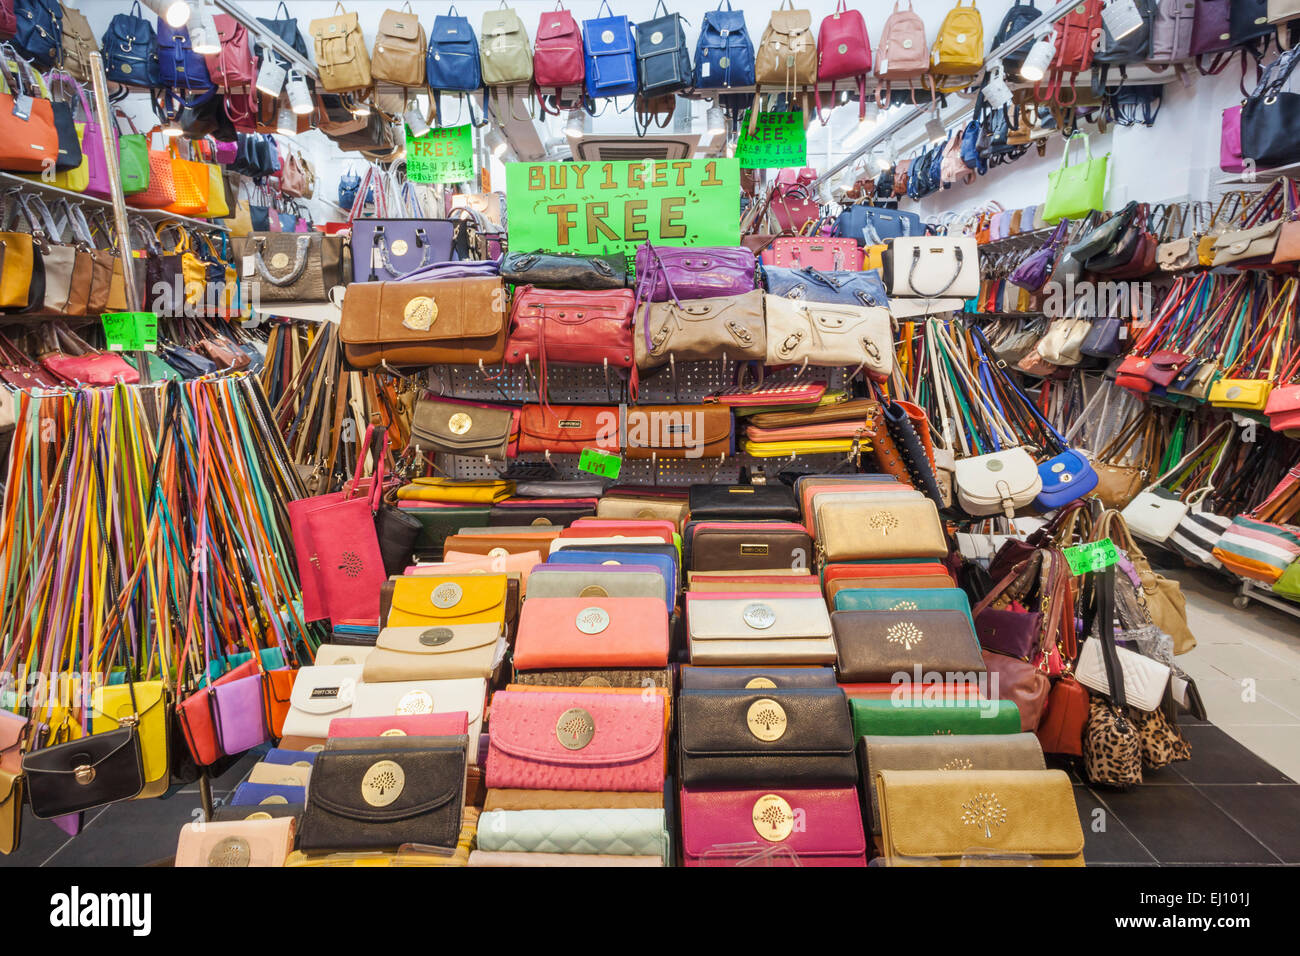 Fake luxury purses are sold on a sidewalk in downtown Guiyang, the capital  of China's Guizhou Province, on May 2, 2015. China remains the largest  manufacturer and supplier of counterfeit luxury goods